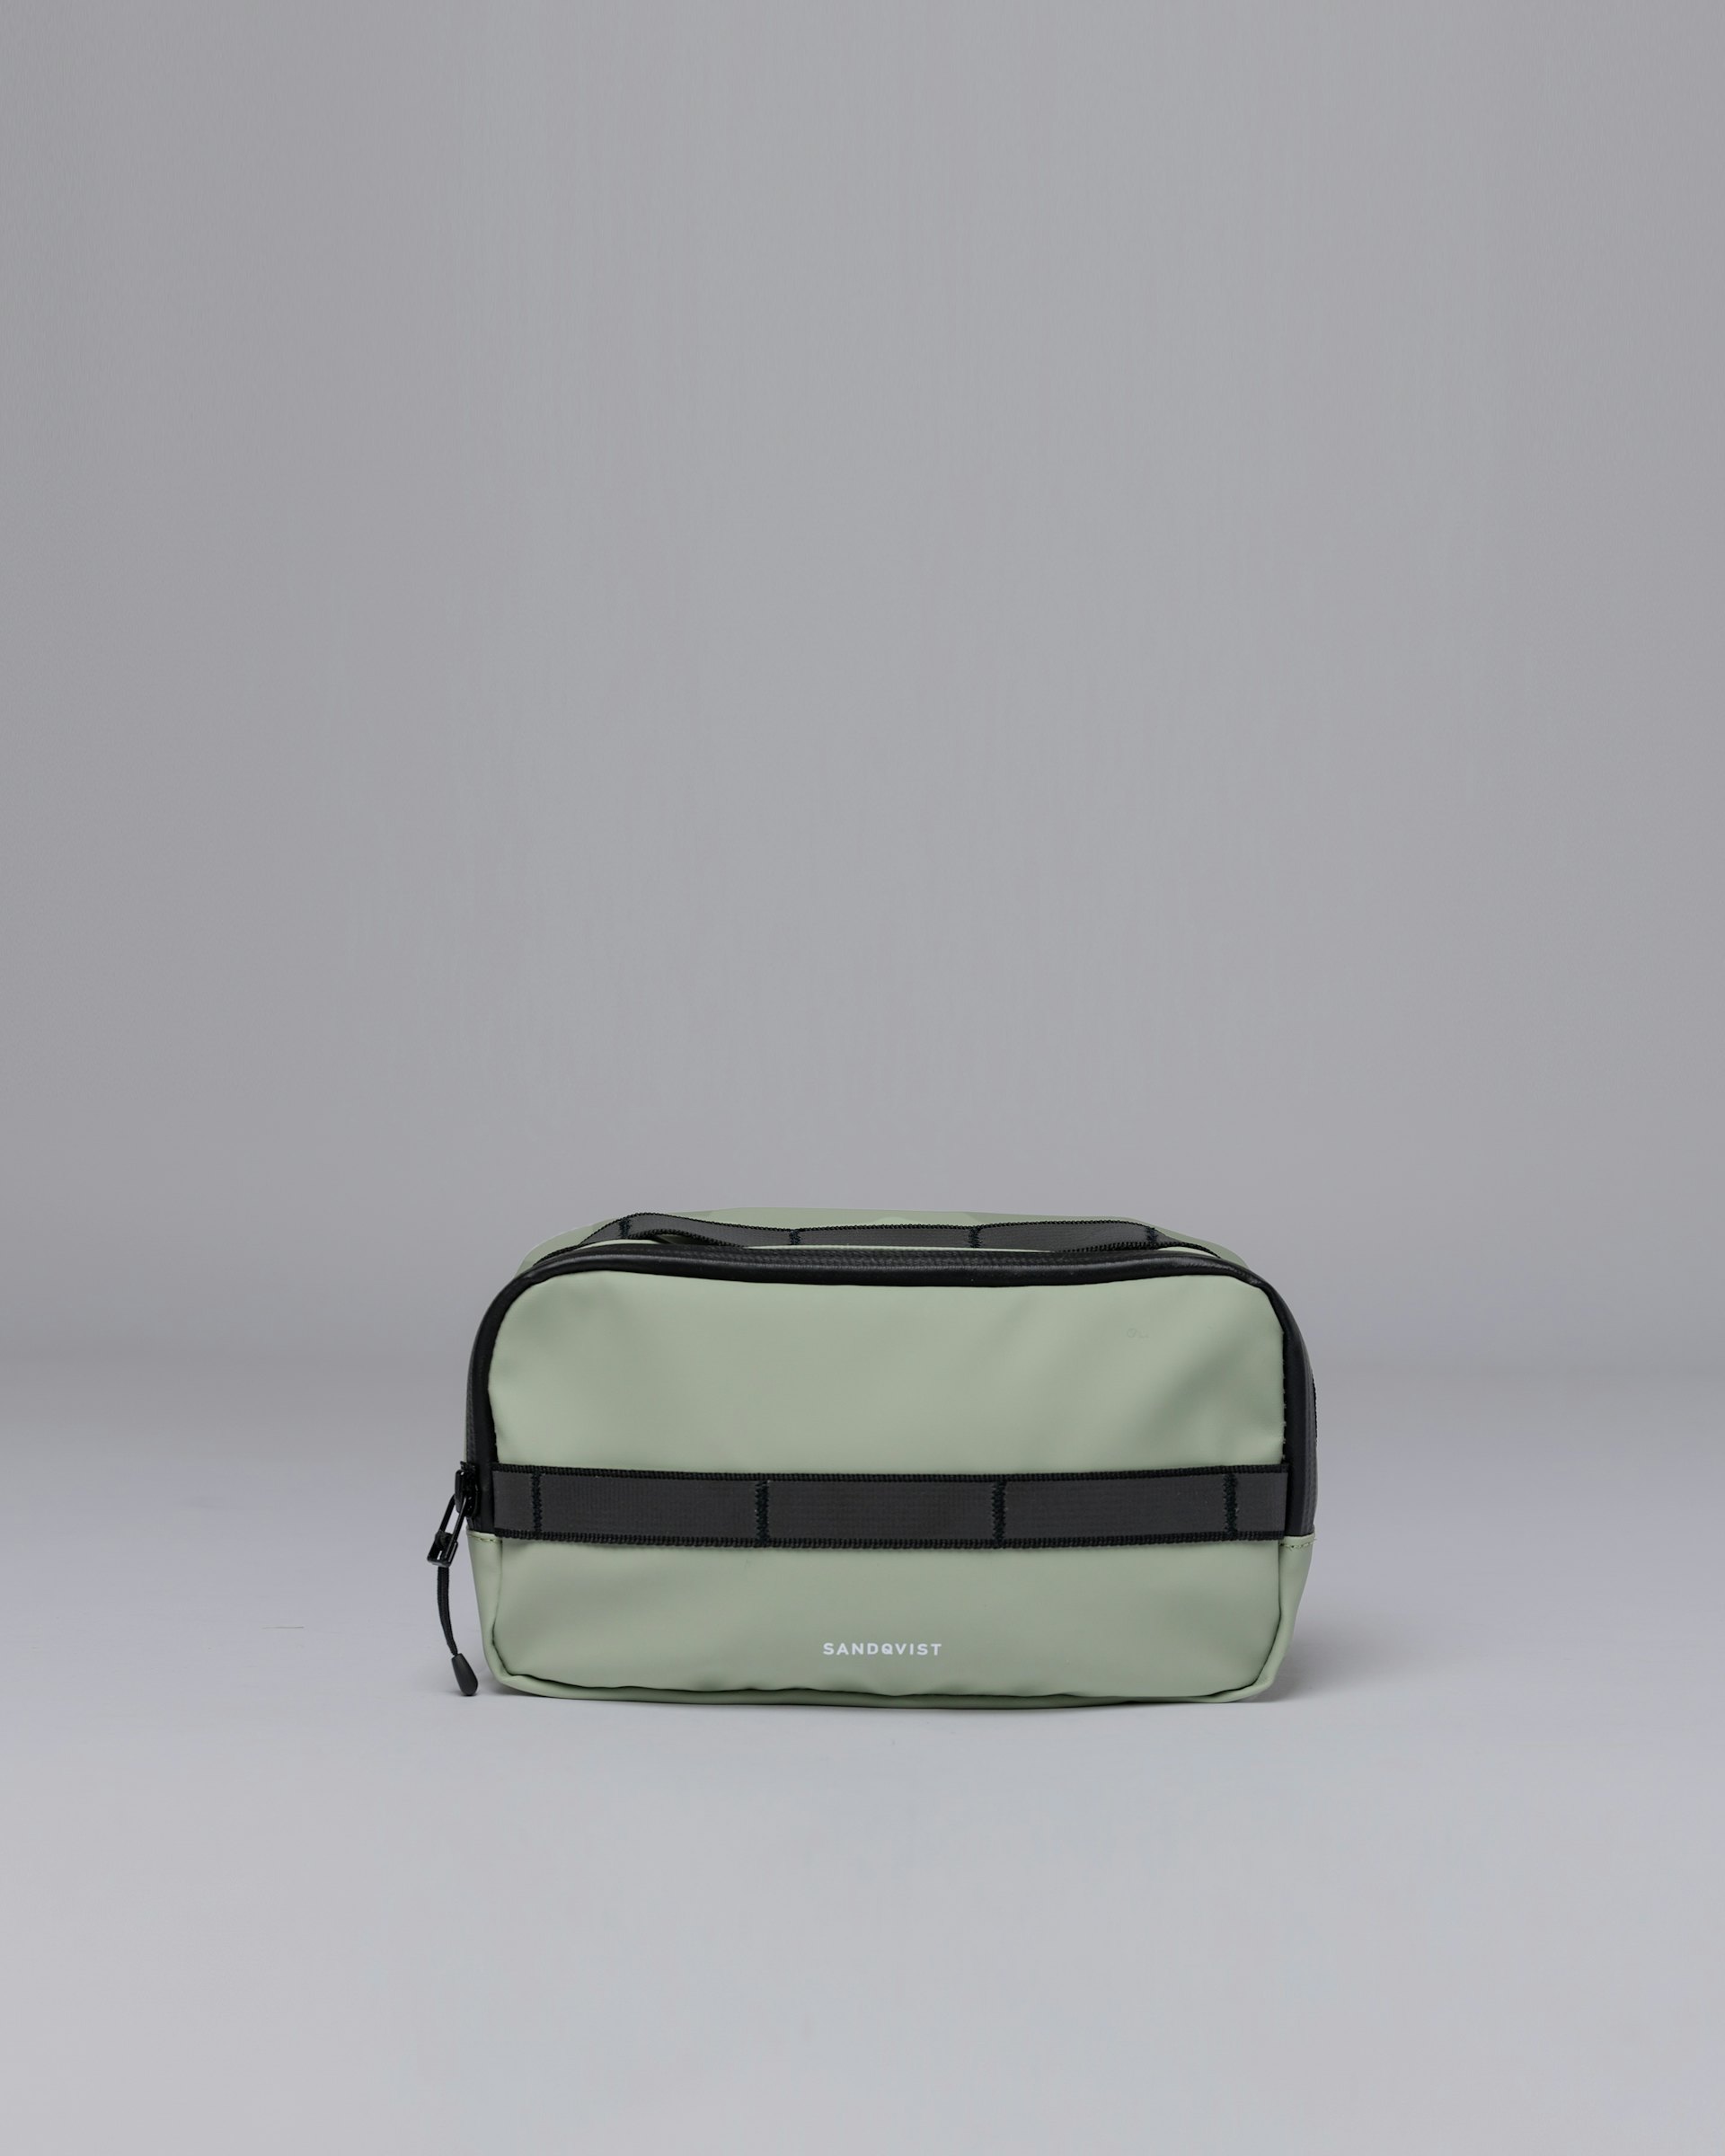 Uno belongs to the category Shoulder bags and is in color dew green